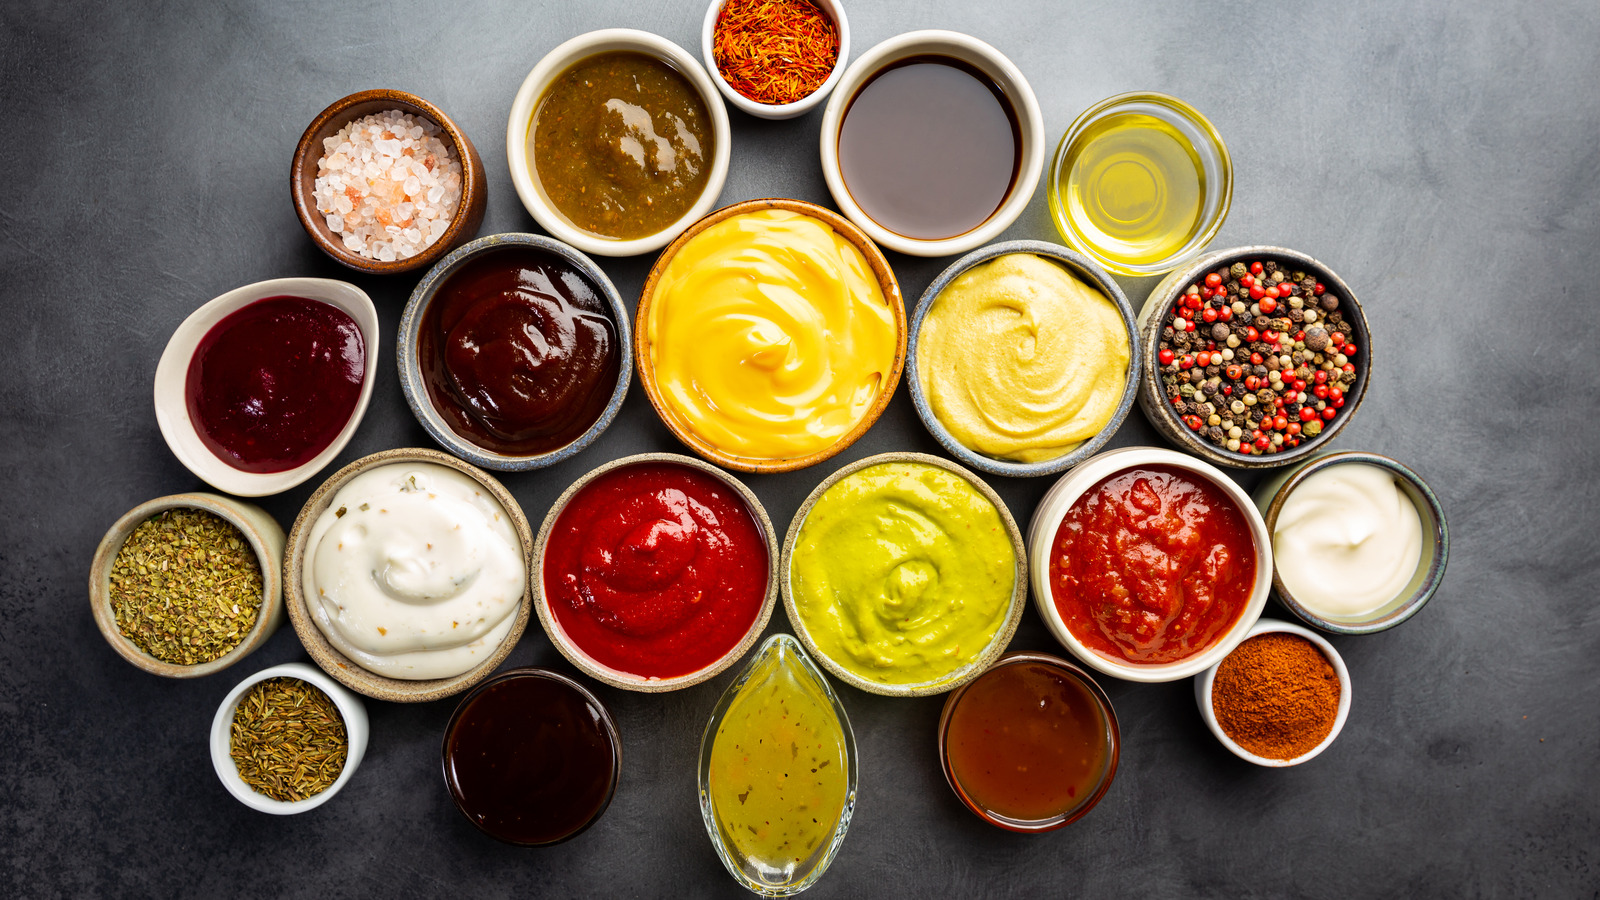 https://www.tastingtable.com/img/gallery/17-british-sauces-and-condiments-you-should-know/l-intro-1691160007.jpg